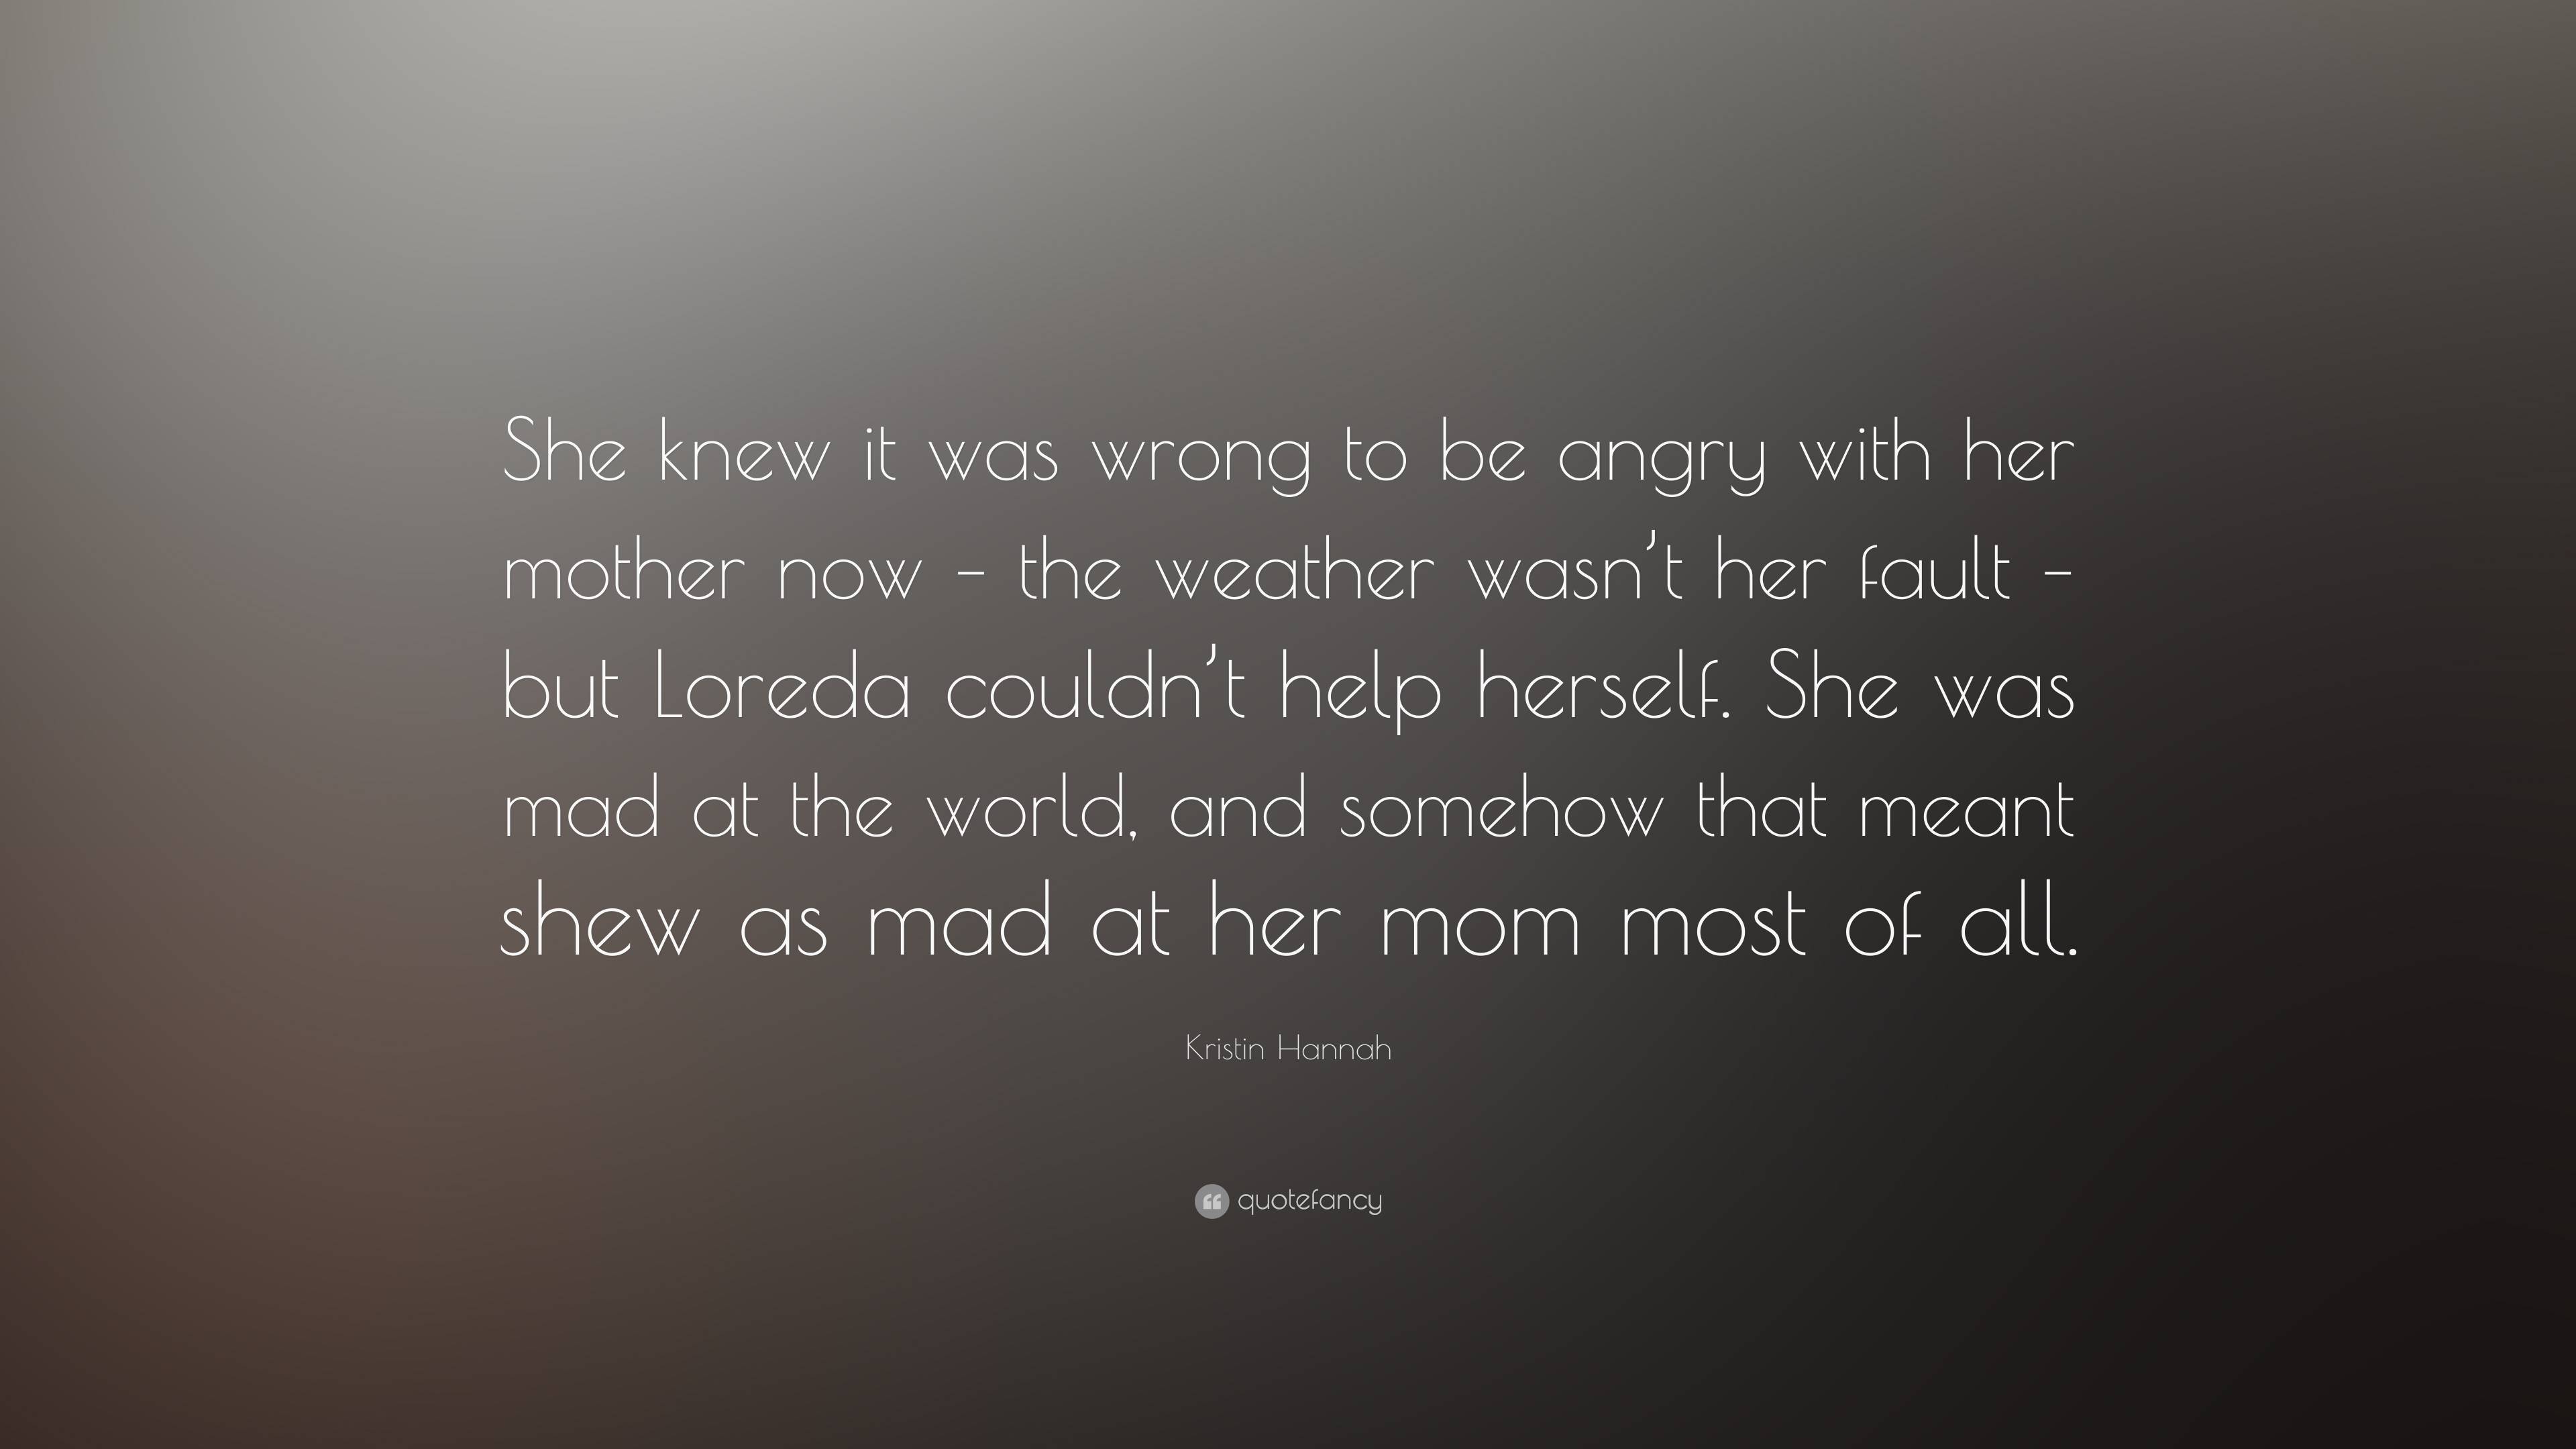 Kristin Hannah Quote: “She knew it was wrong to be angry with her ...